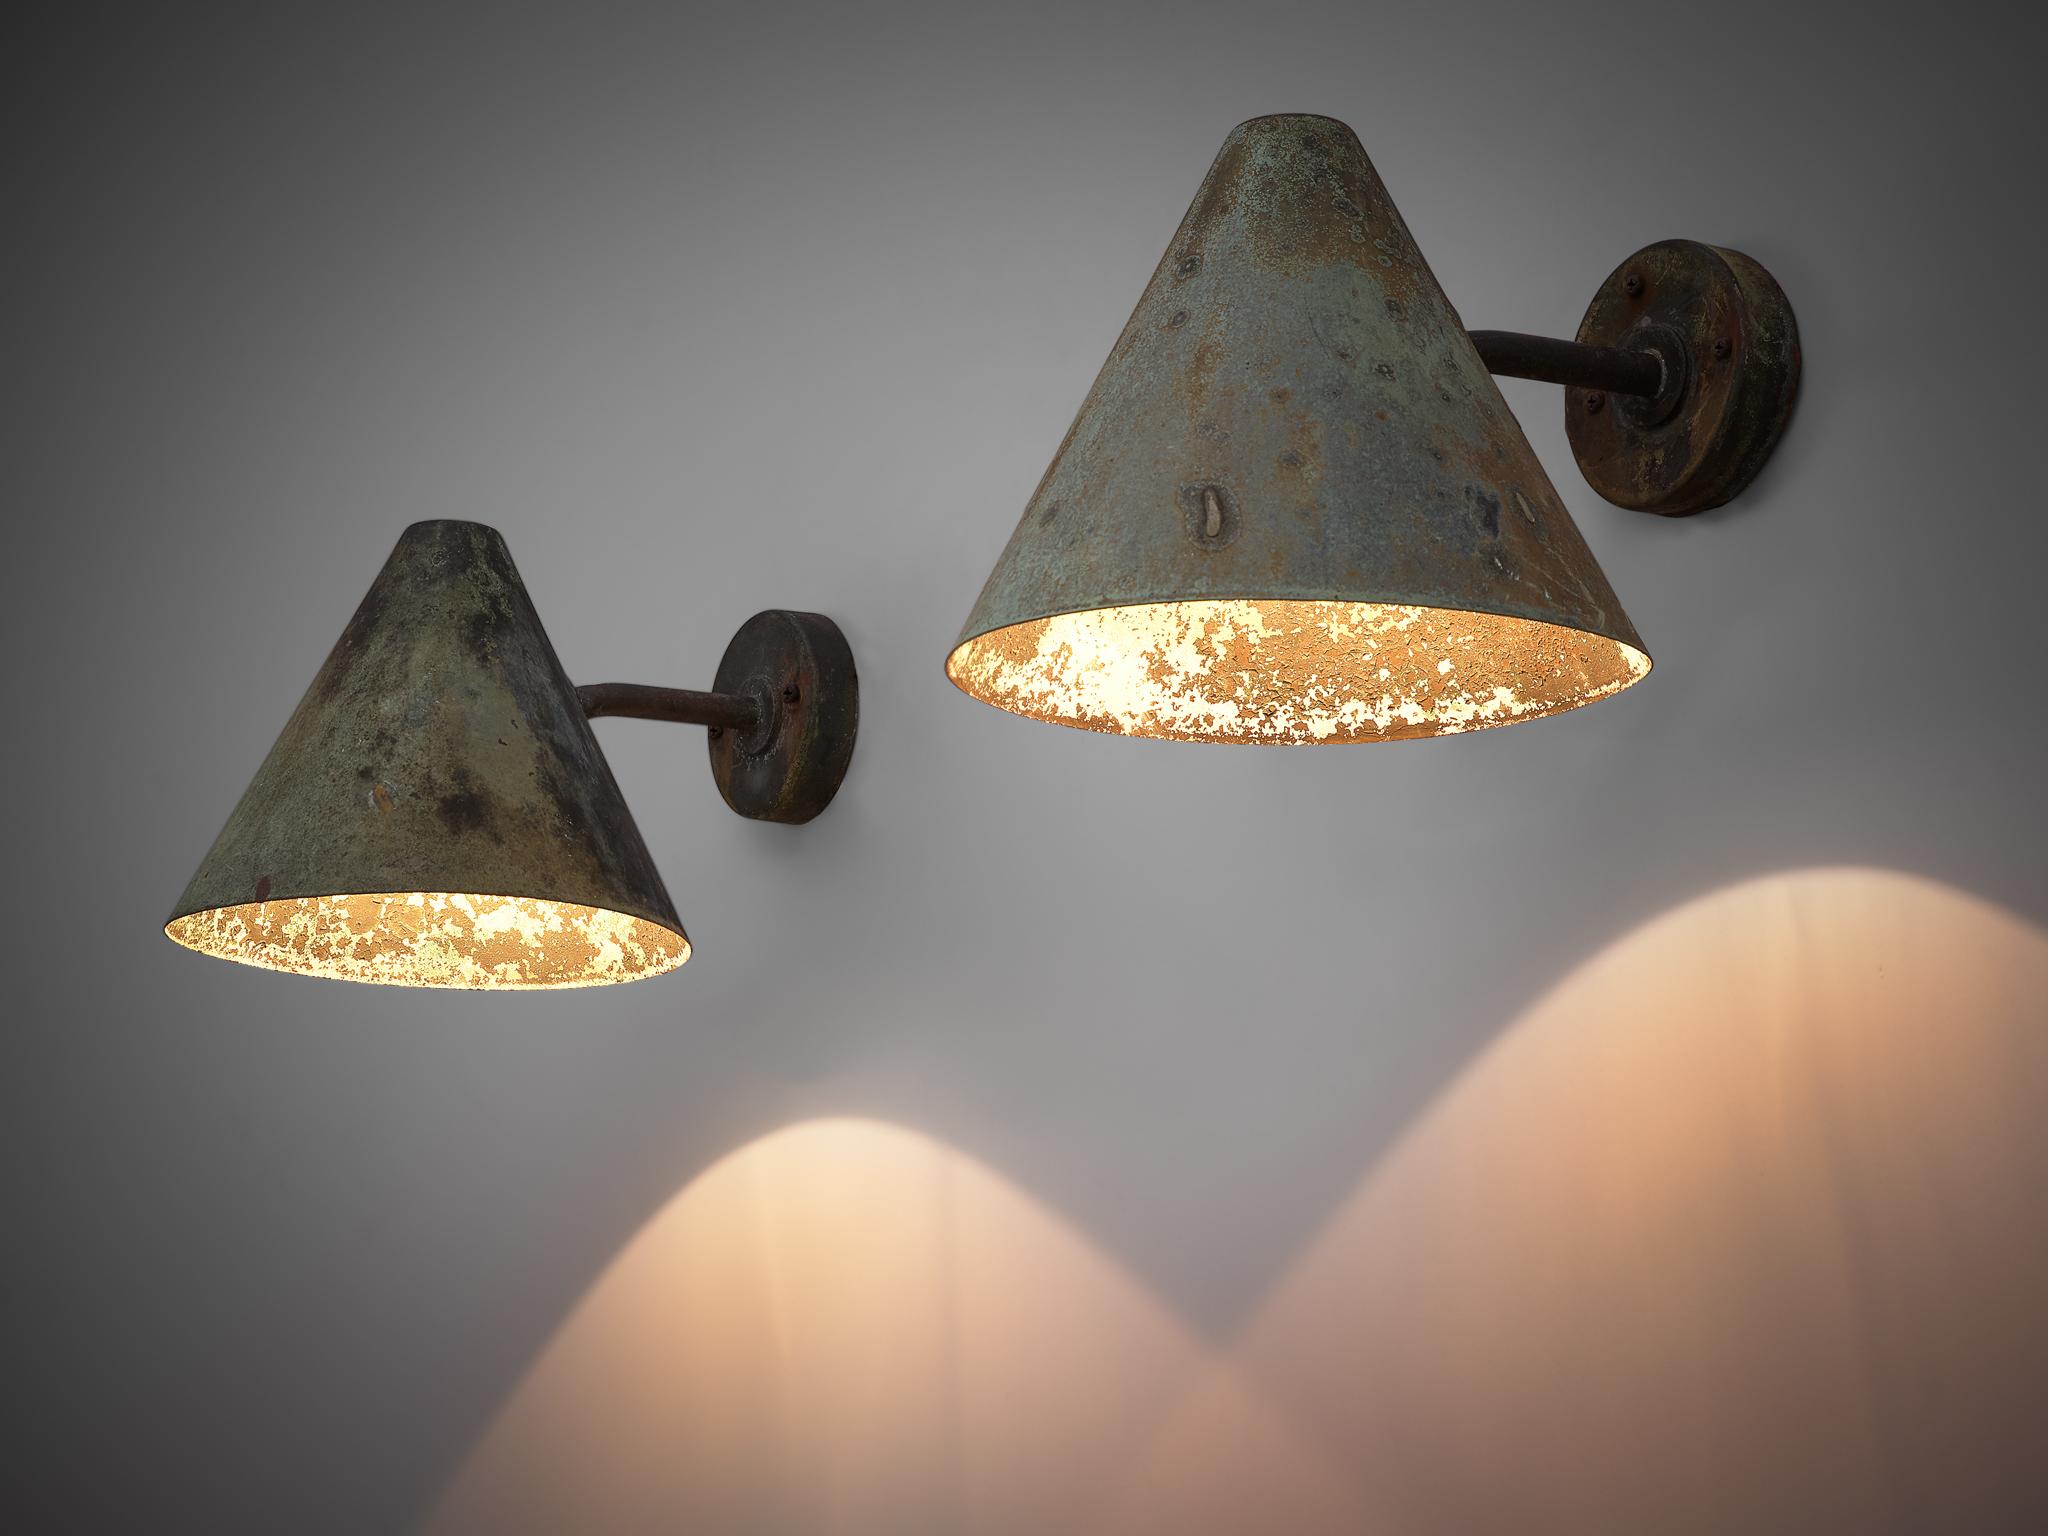 Hans-Agne Jakobsson for AB Markaryd, set of 2 wall lights, copper, by Sweden, 1950s.

Pair of cone-shaped wall light designed by Hans-Agne Jakobsson for AB Markaryd, in beautifully patinated copper. The light that this model shines creates a